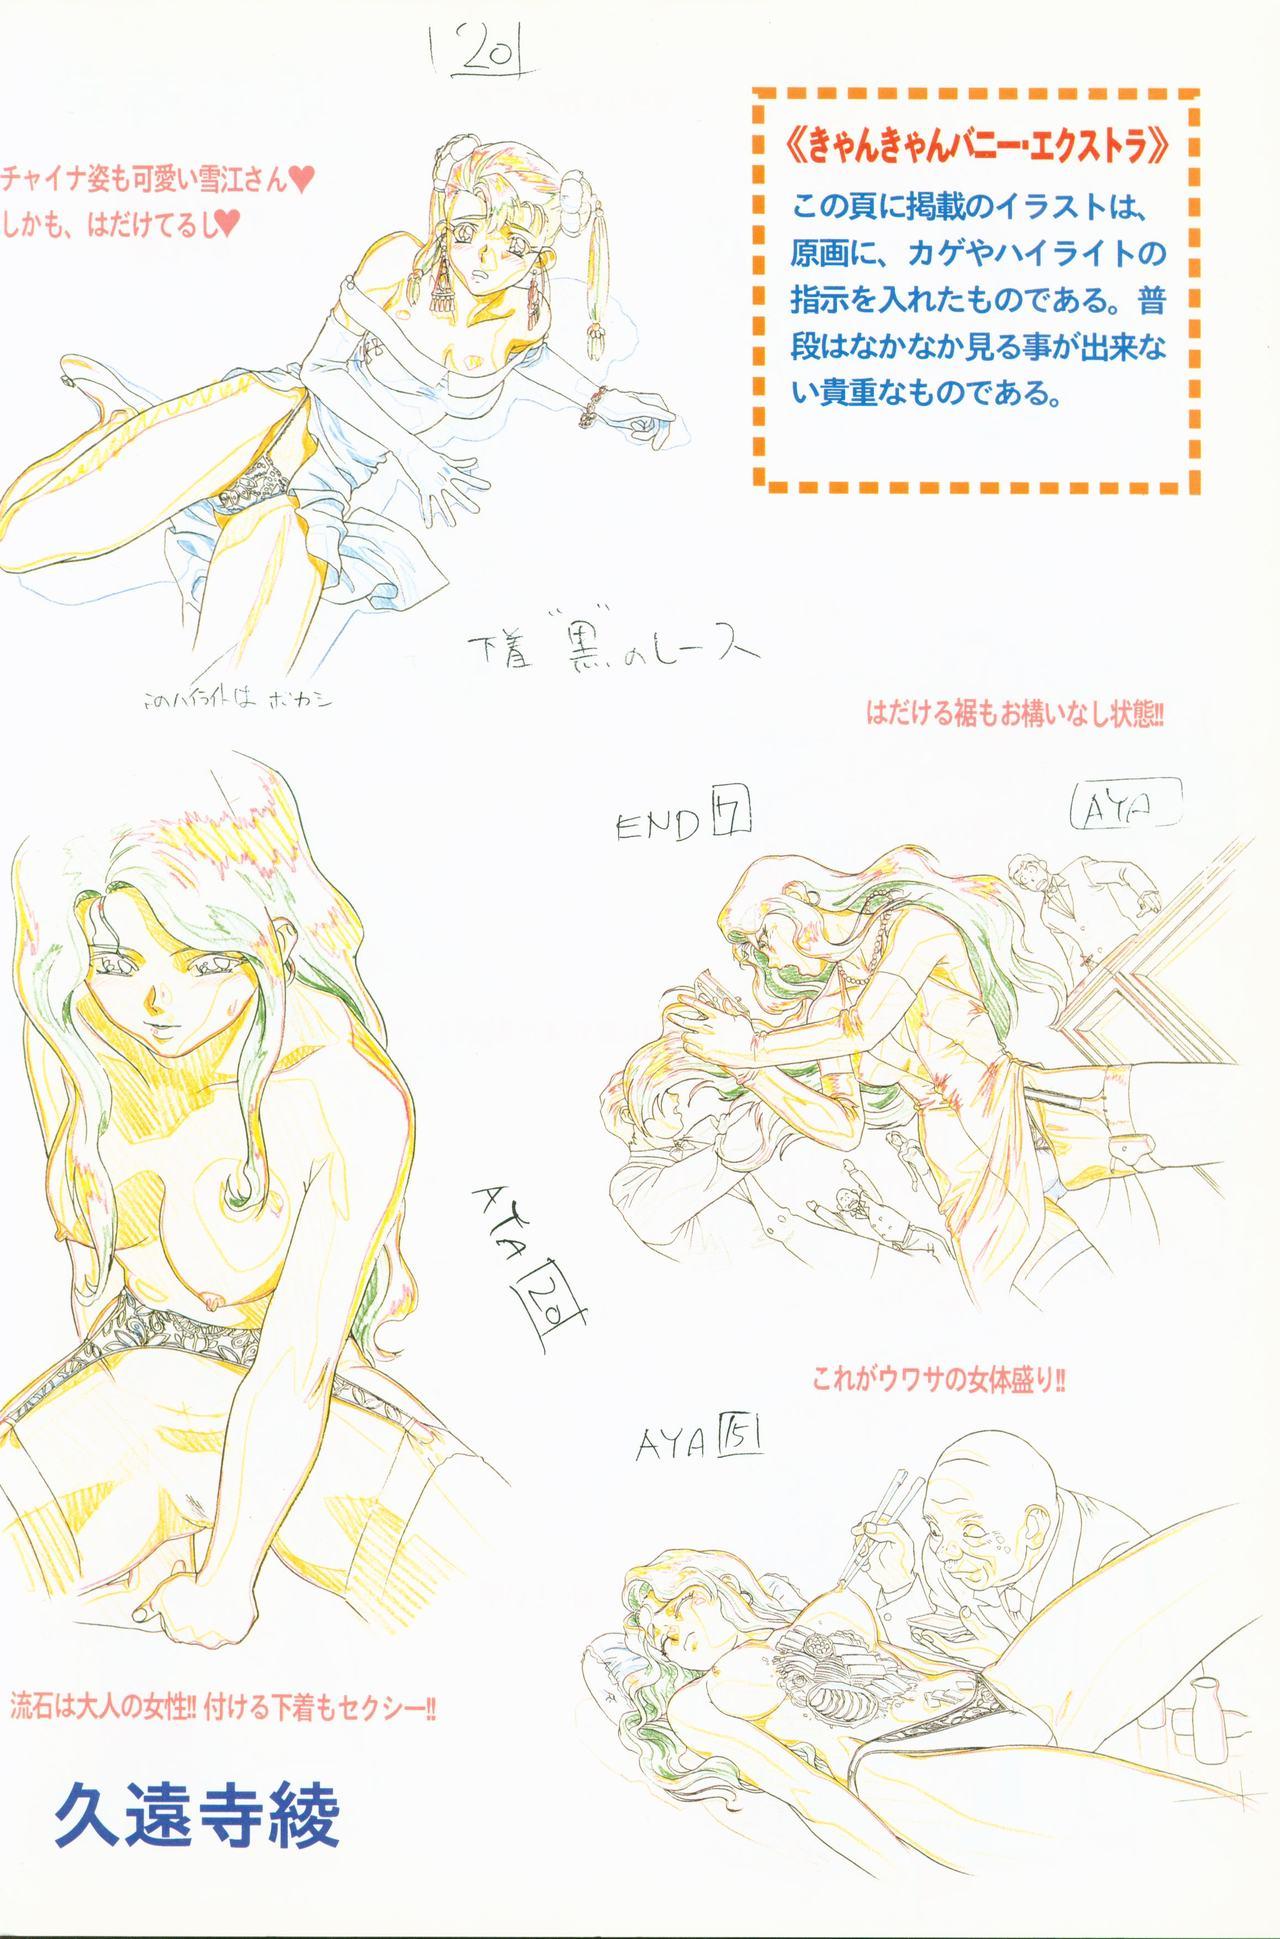 CAN CAN BUNNY OFFICIAL ART BOOK 7